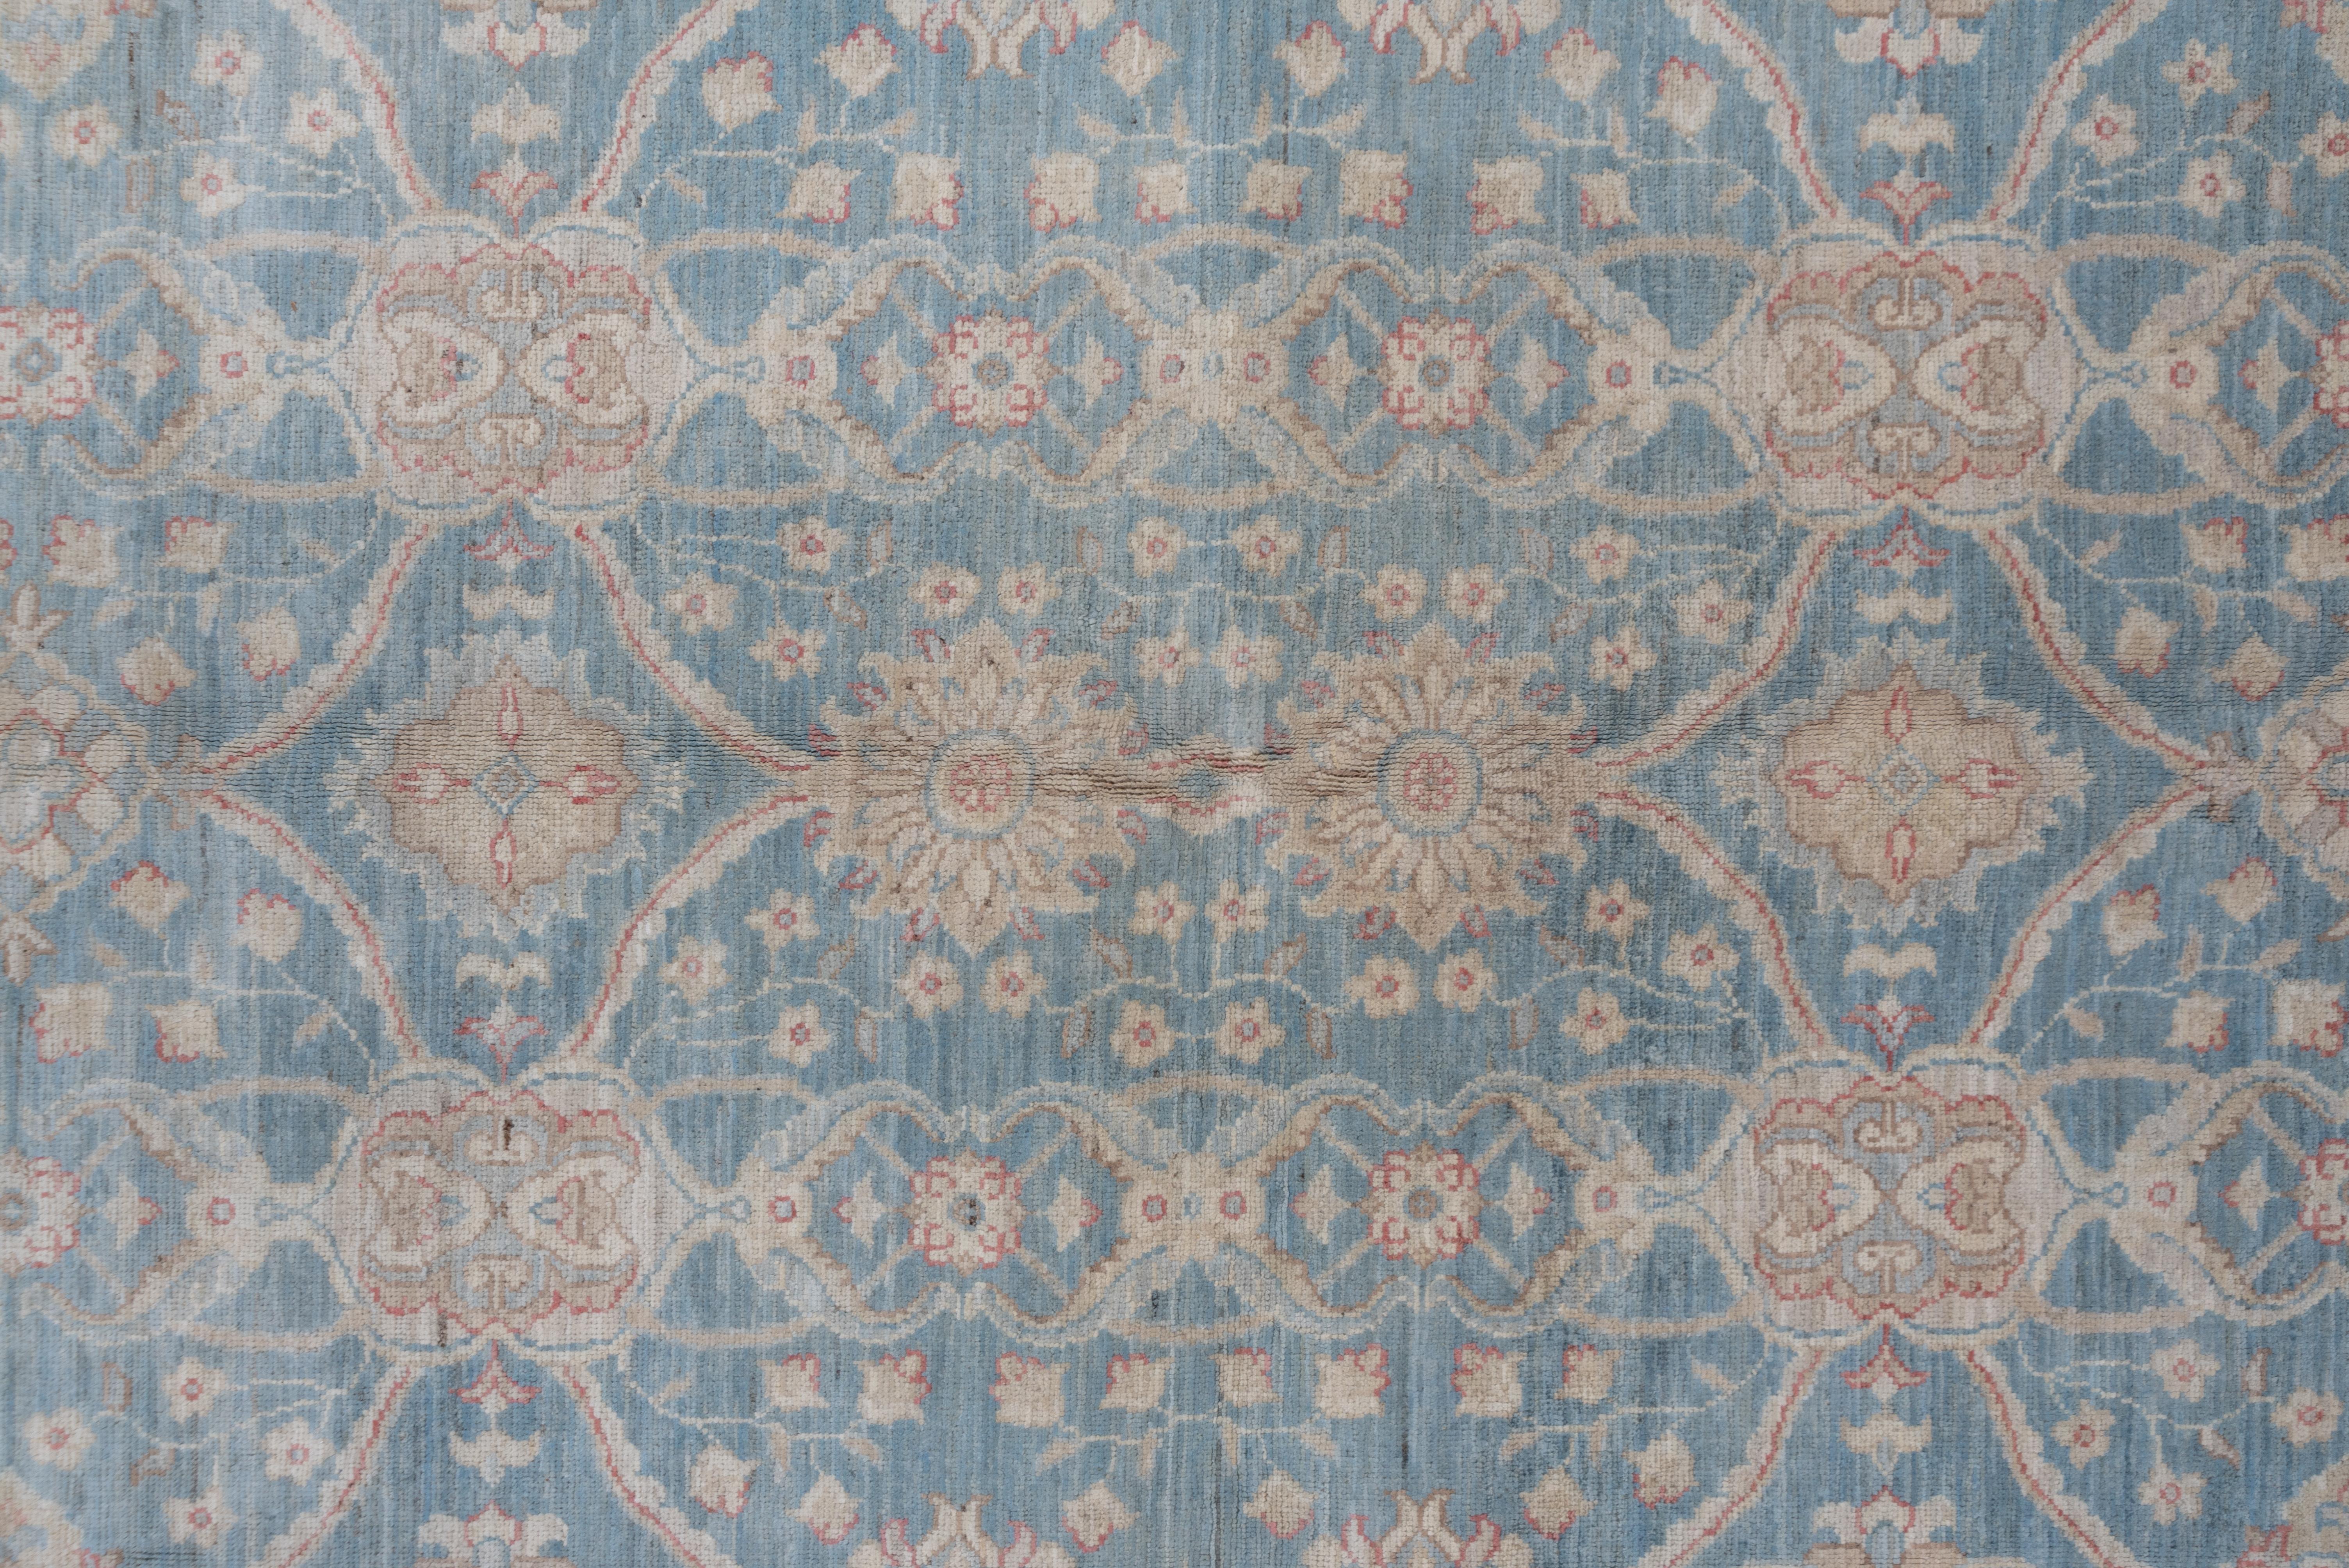 Hand Knotted Blue Persian Mahal Style Carpet In Excellent Condition For Sale In New York, NY